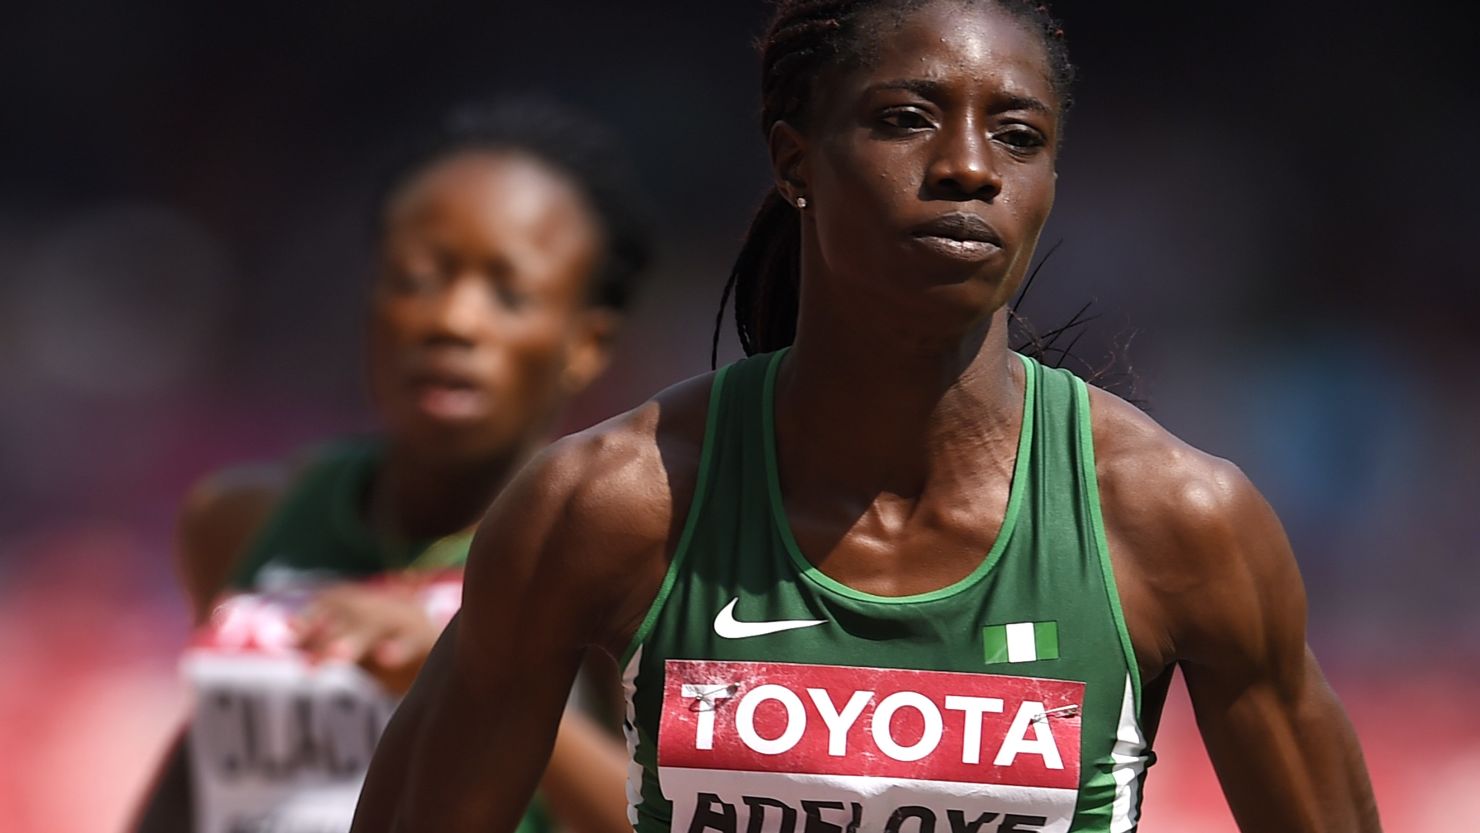 Nigeria's Tosin Adeloye has been disqualified after testing positive for a banned substance. 